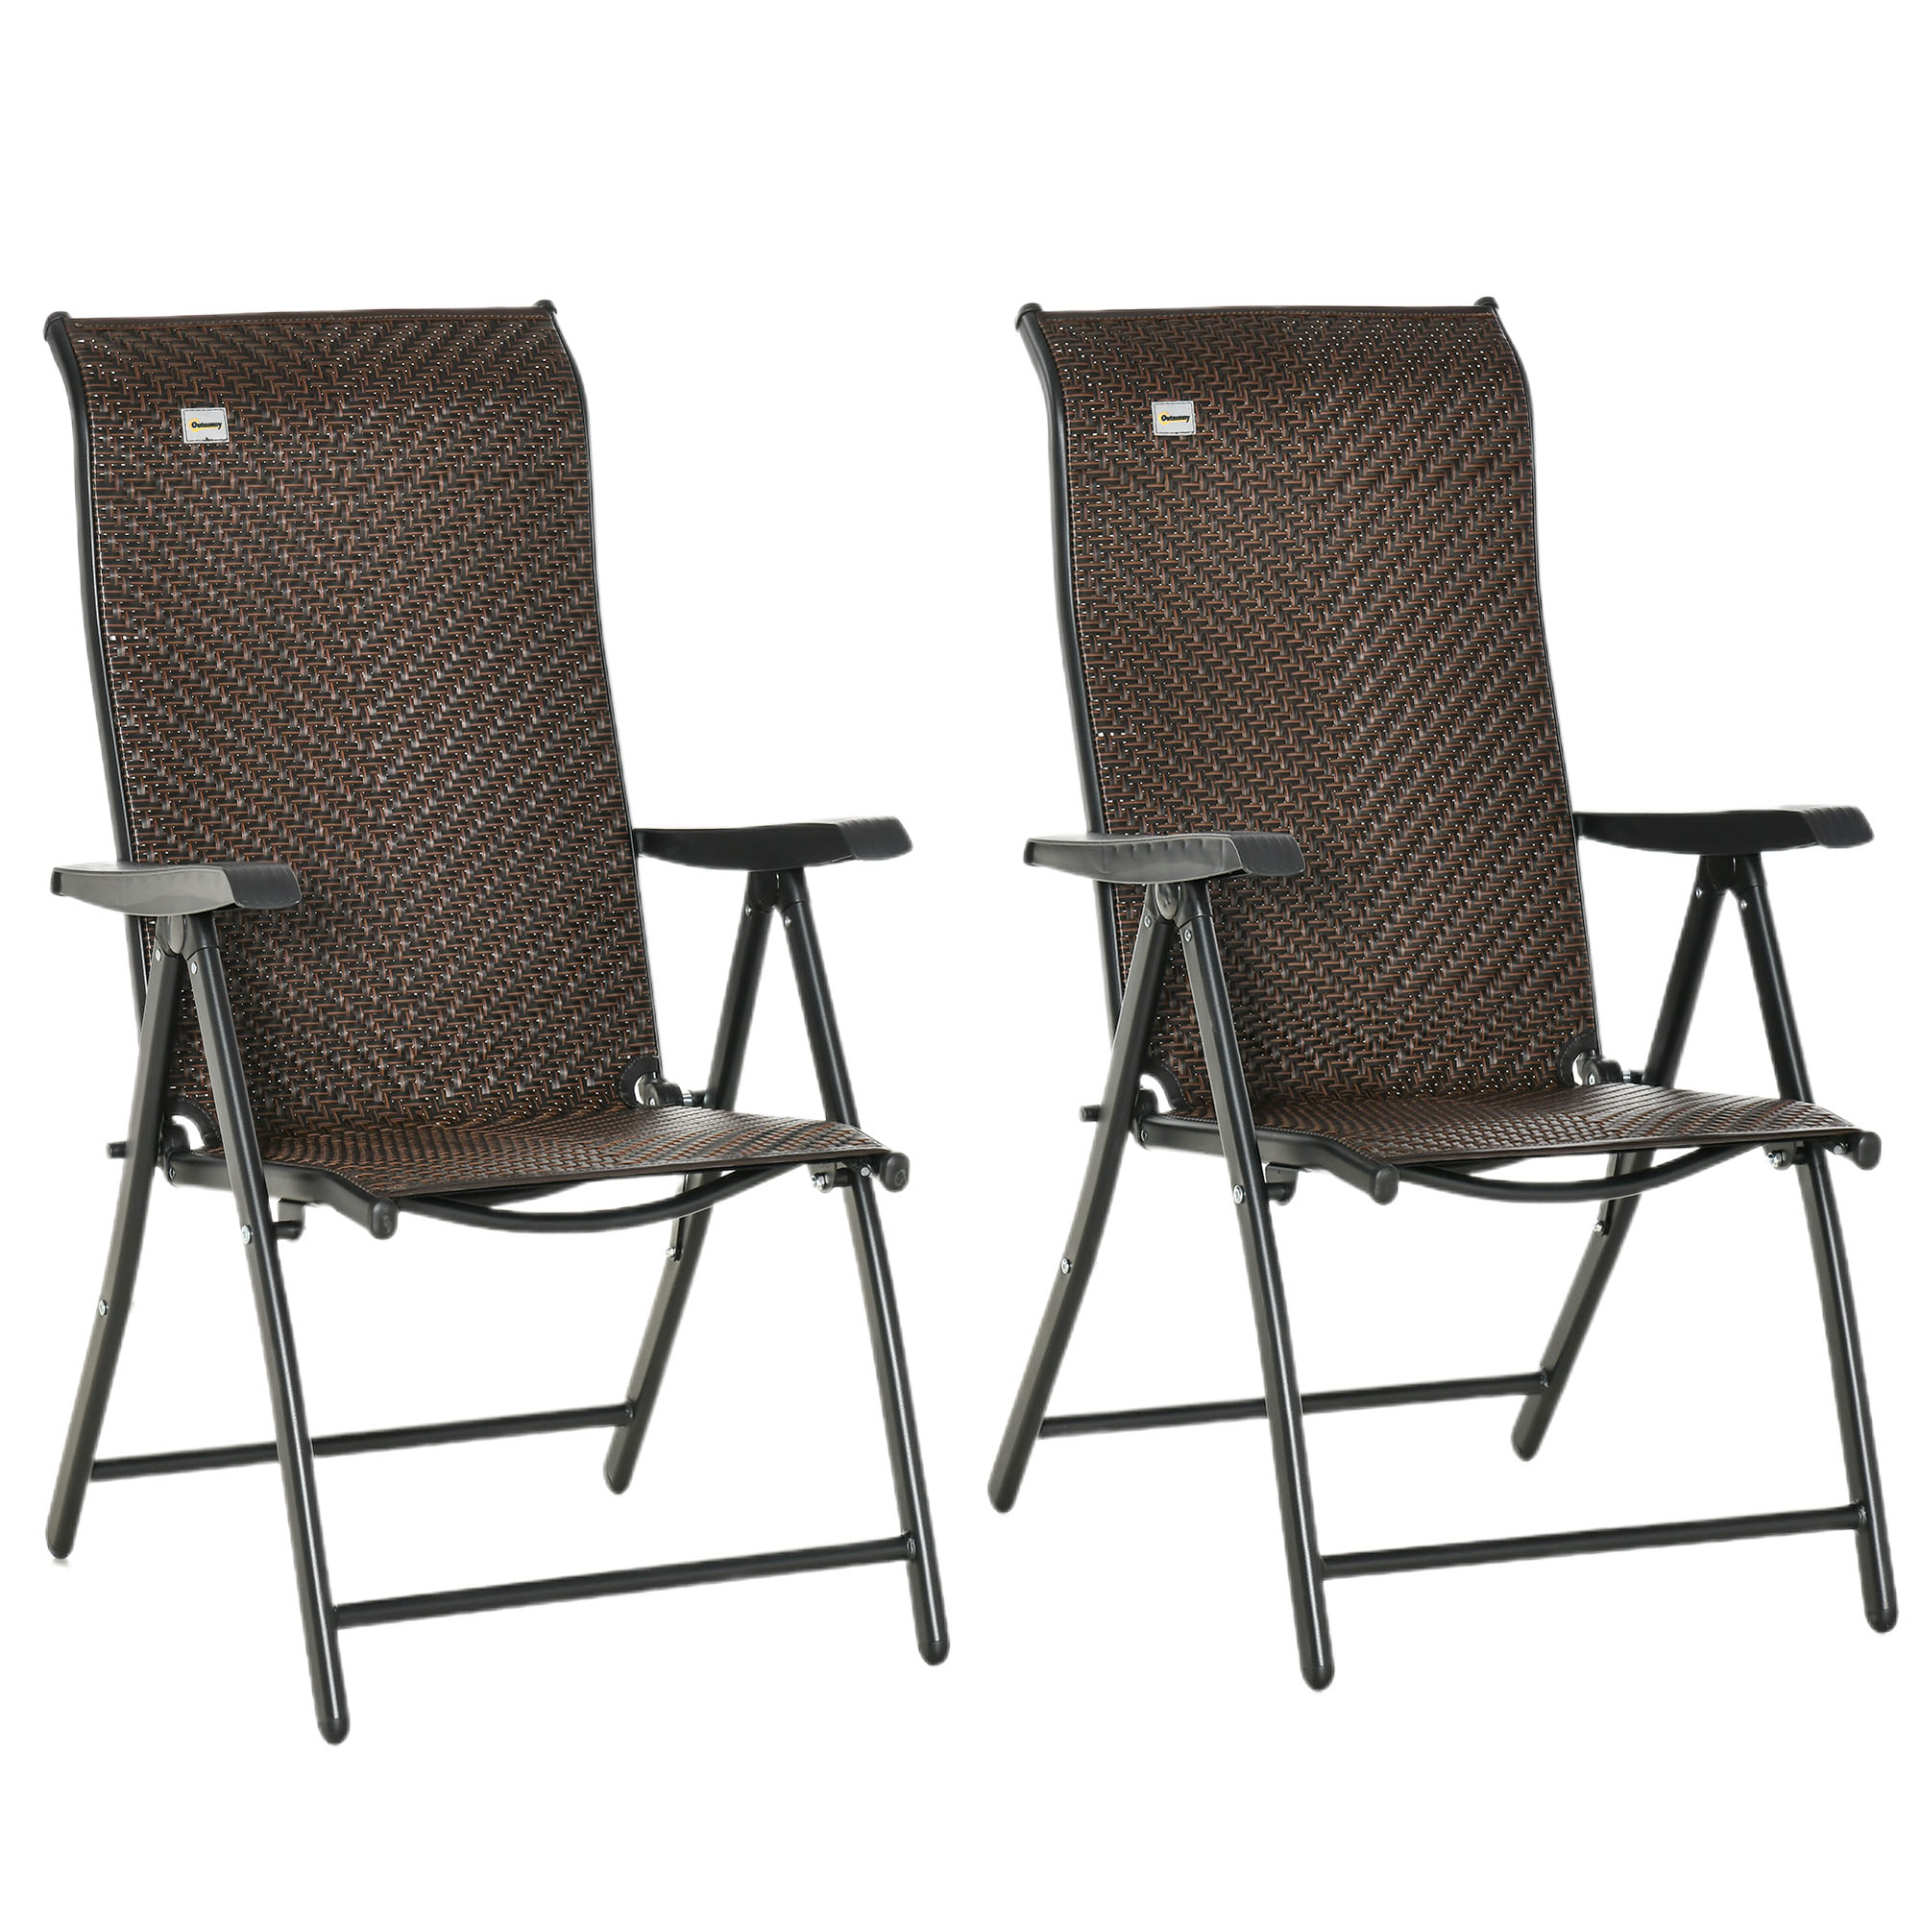 Outsunny Set of 2 Outdoor Wicker Folding Chairs | Adjustable Backrest | Red Brown Camping Chair Cosy Camping Co. Brown  